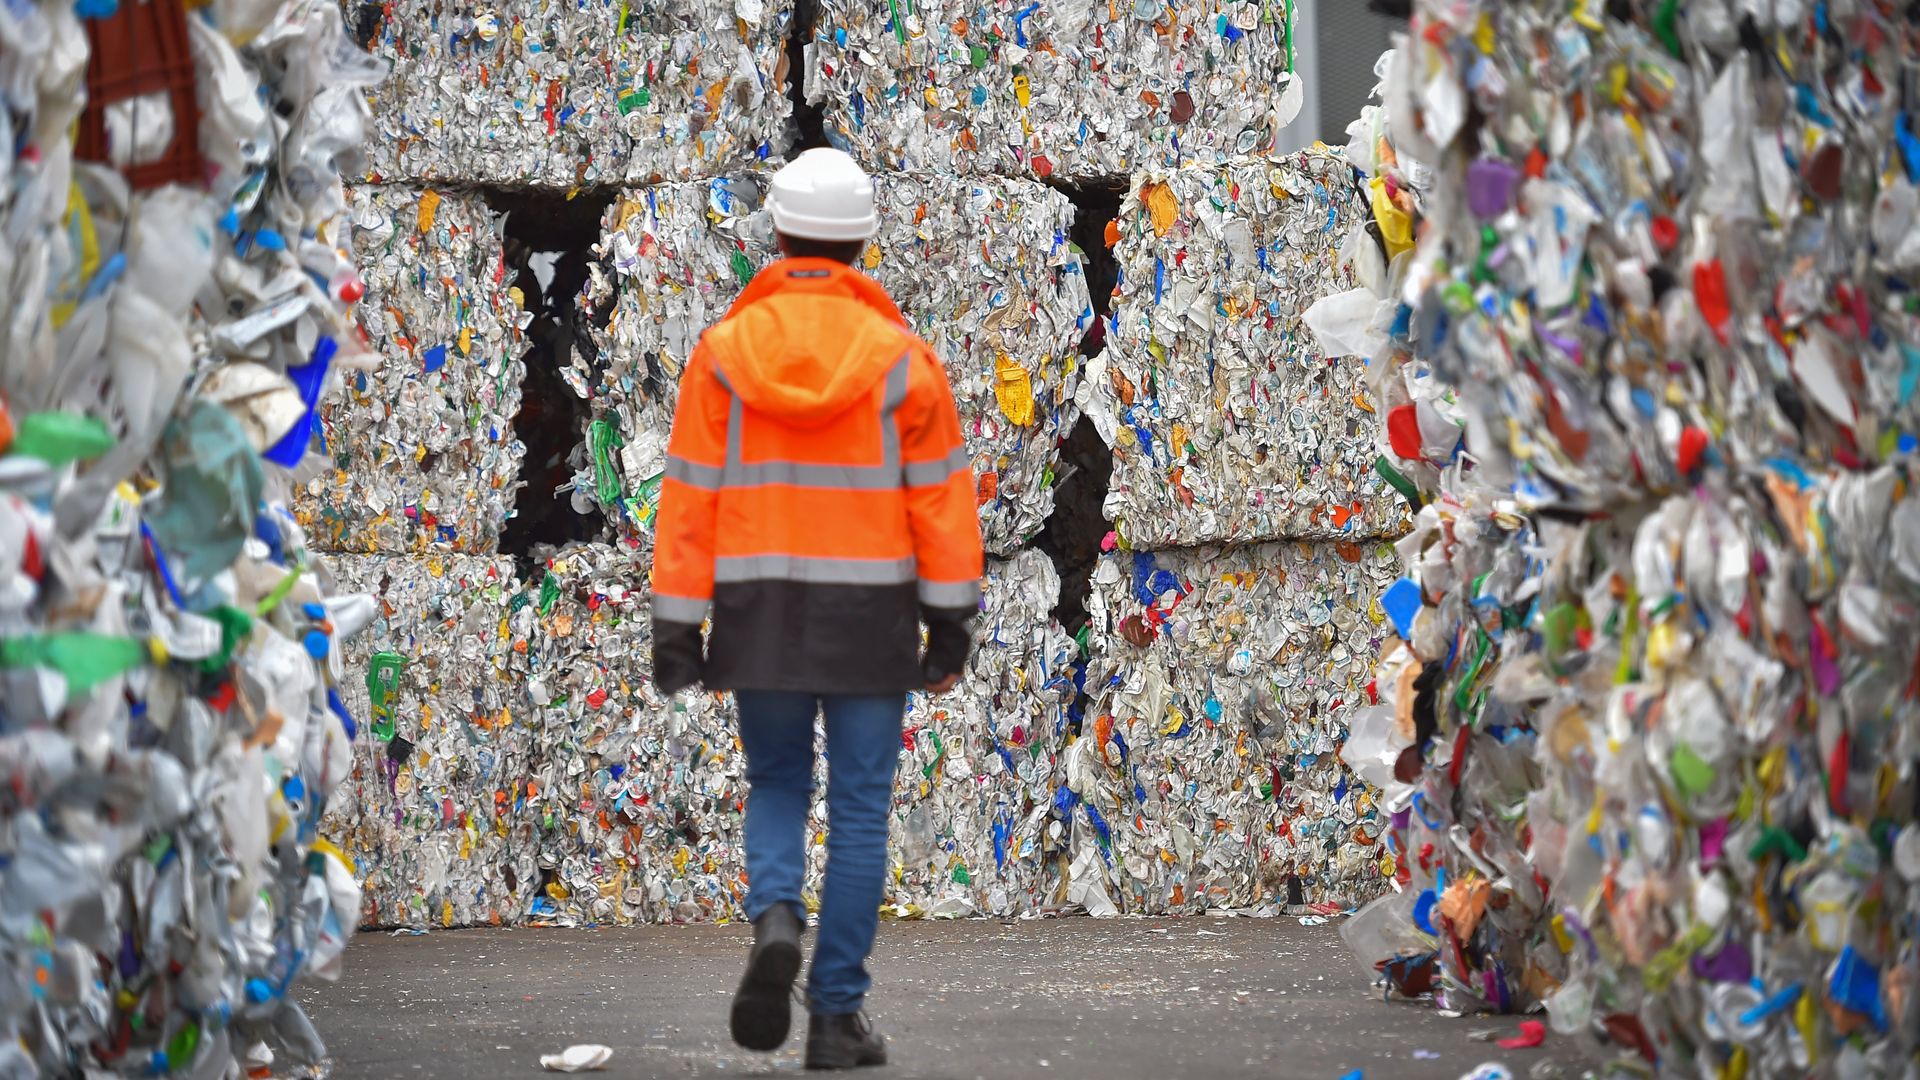 An employee walks through plastic wastes waiting to be recycled at a sorting center in France